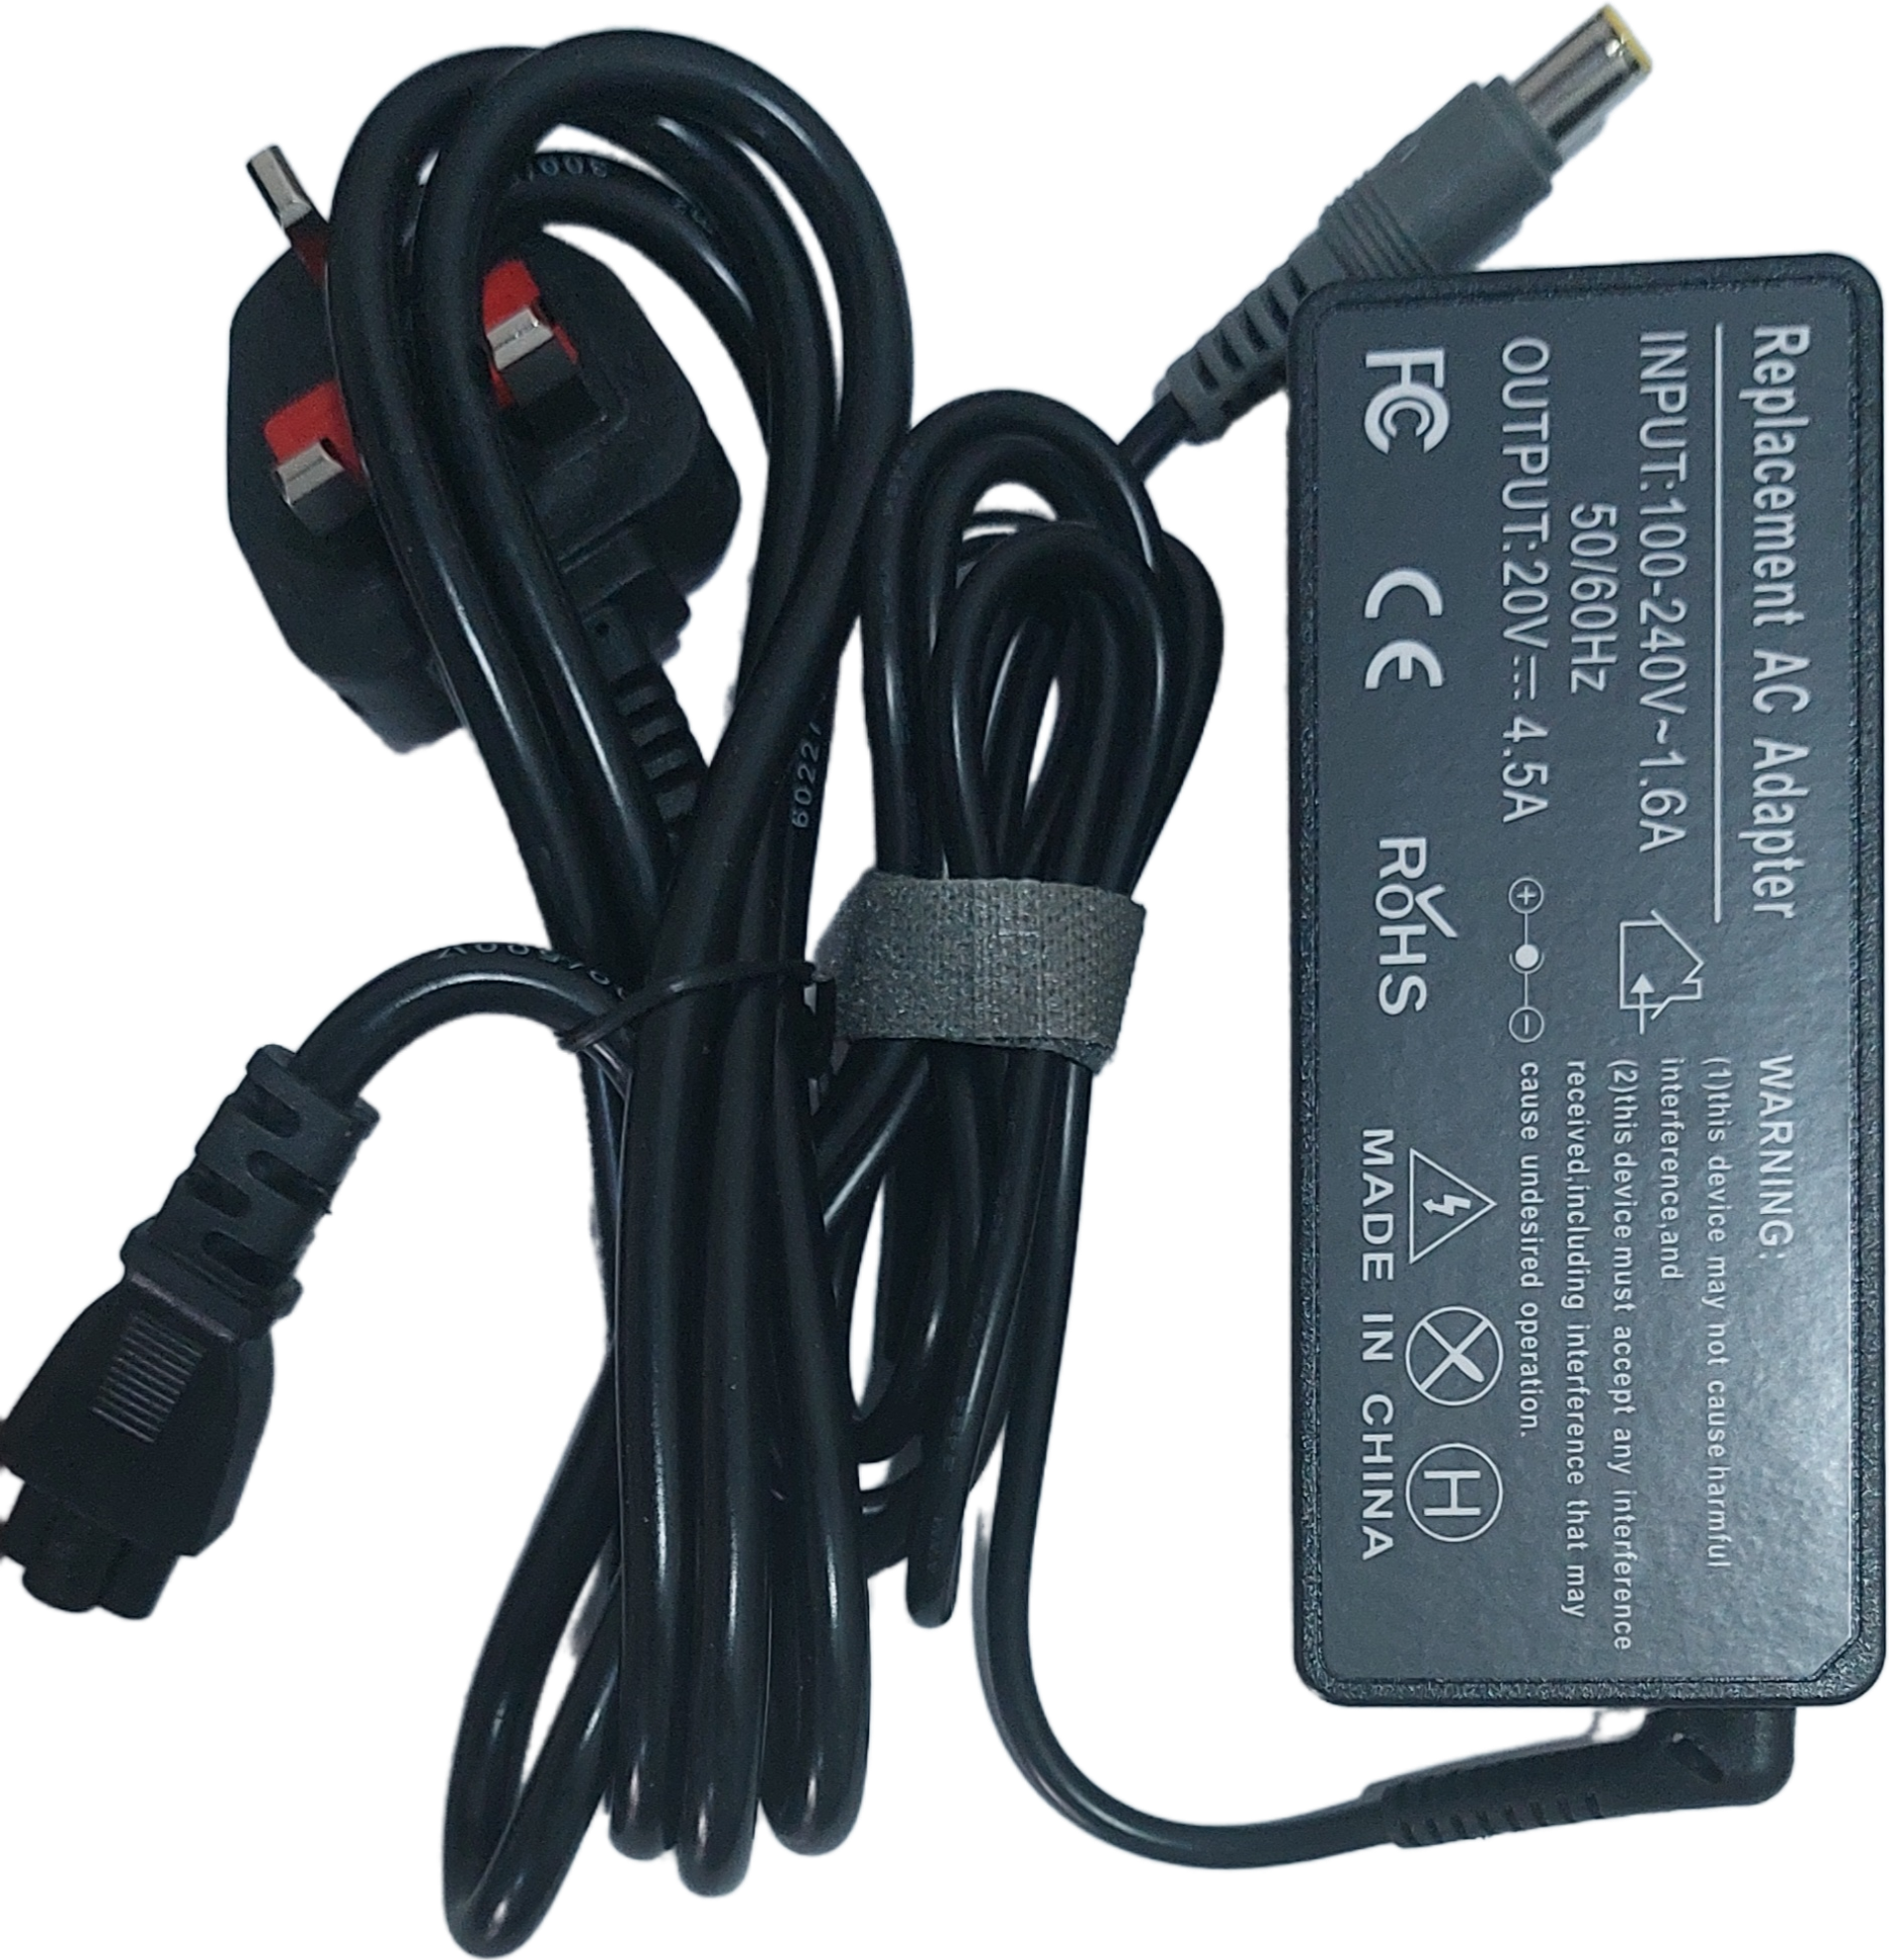 Laptop AC Power Charger Adapter for Lenovo ThinkPad T530 Series